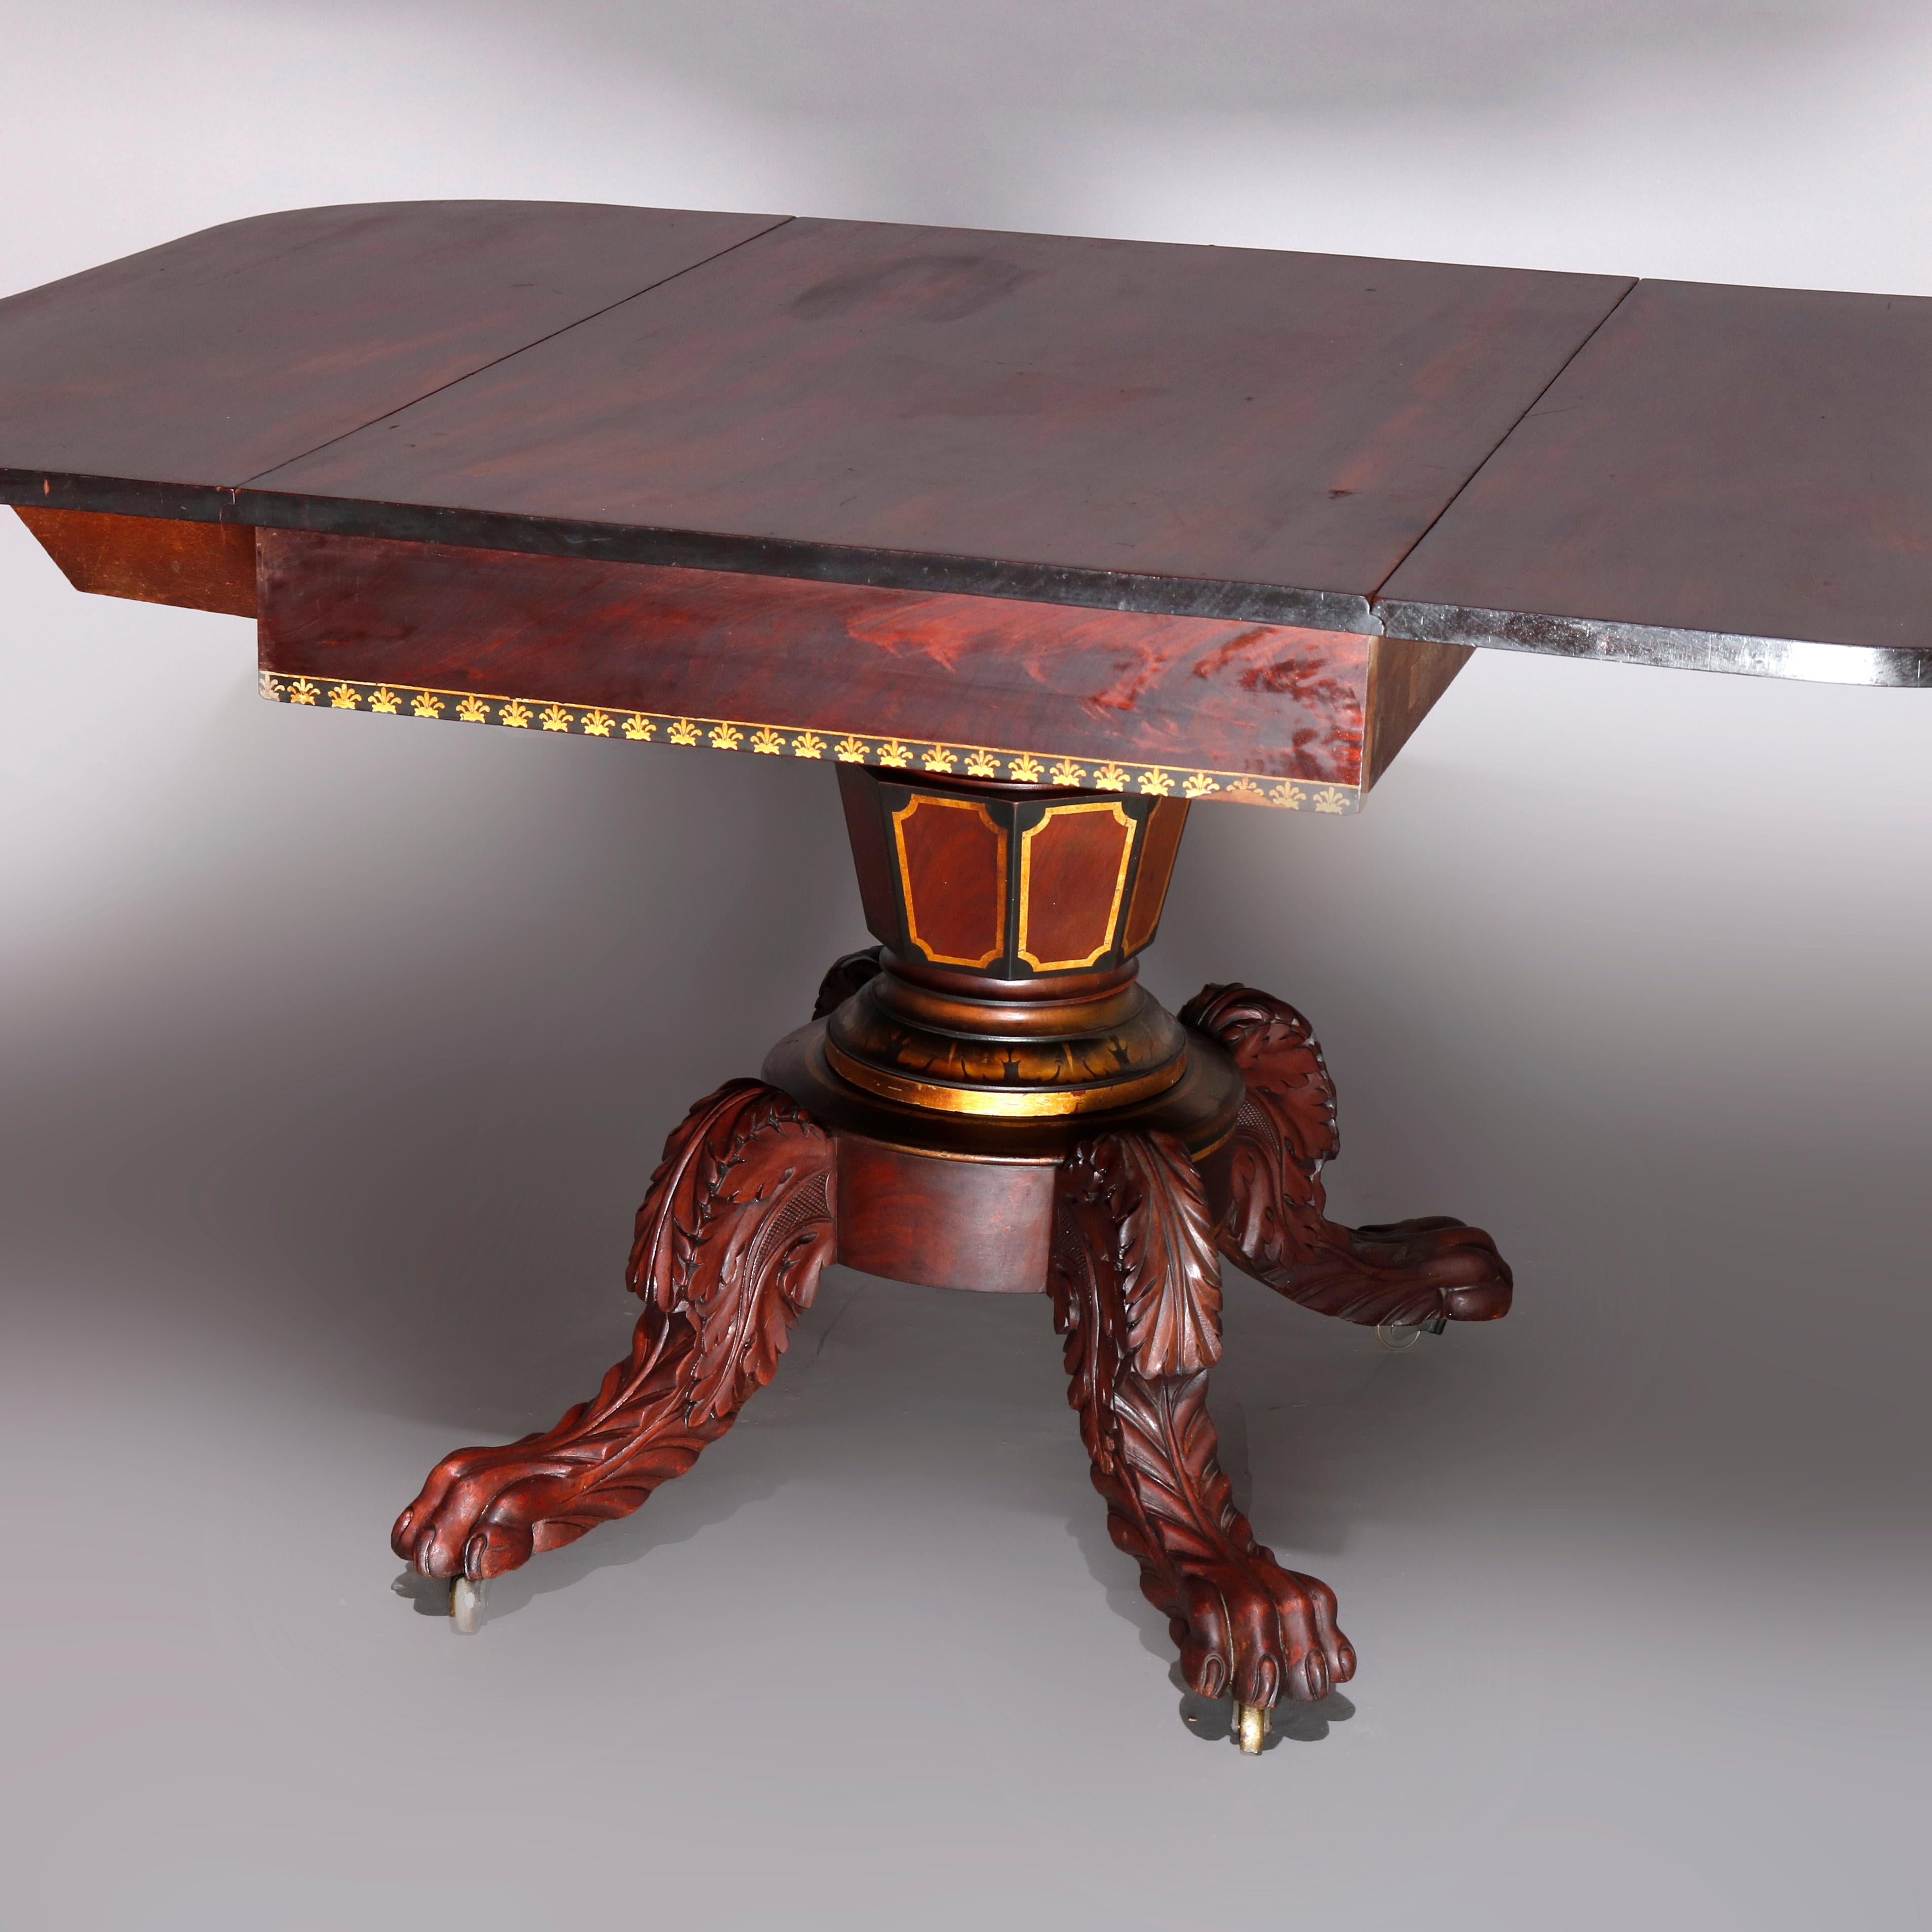 Carved American Empire Classical Flame Mahogany and Gilt Table, Manner of Meeks